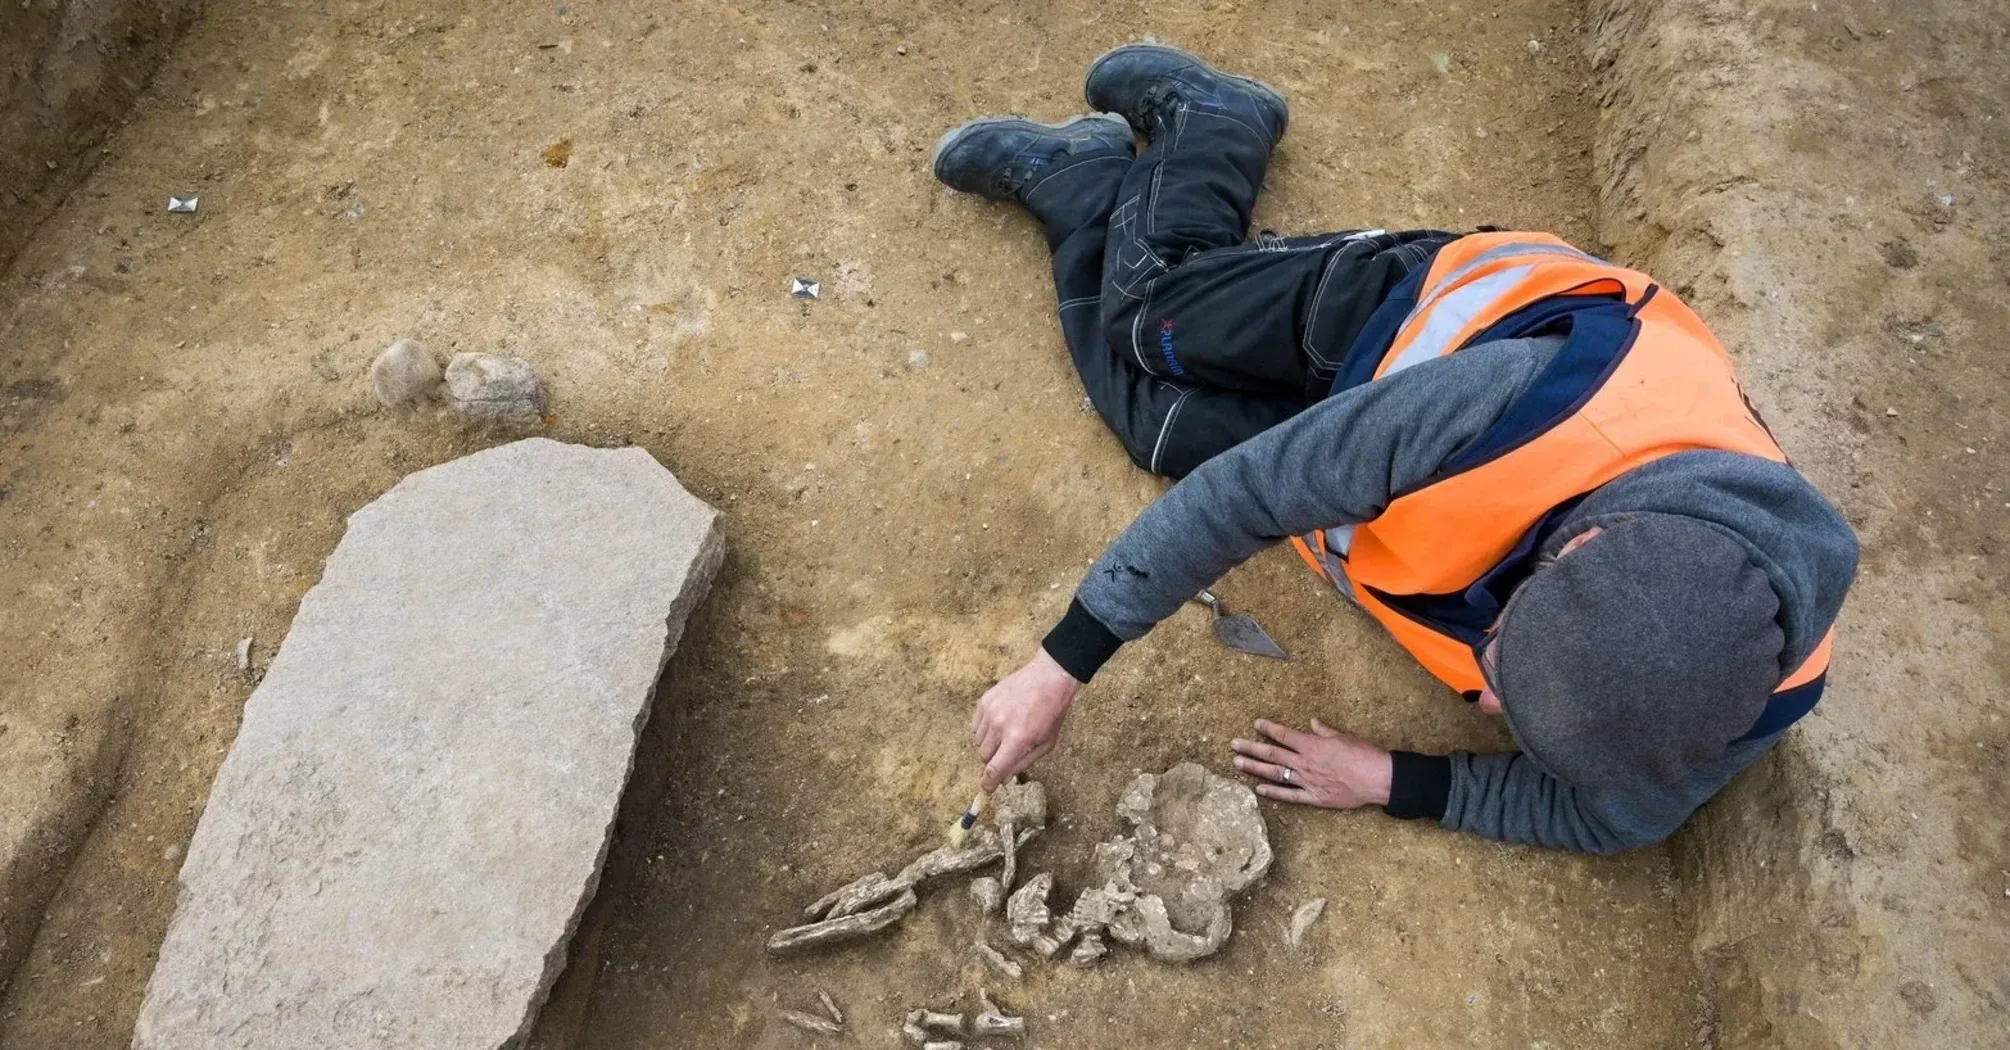 Archaeologists found a 4,200-year-old 'zombie grave' (photo)